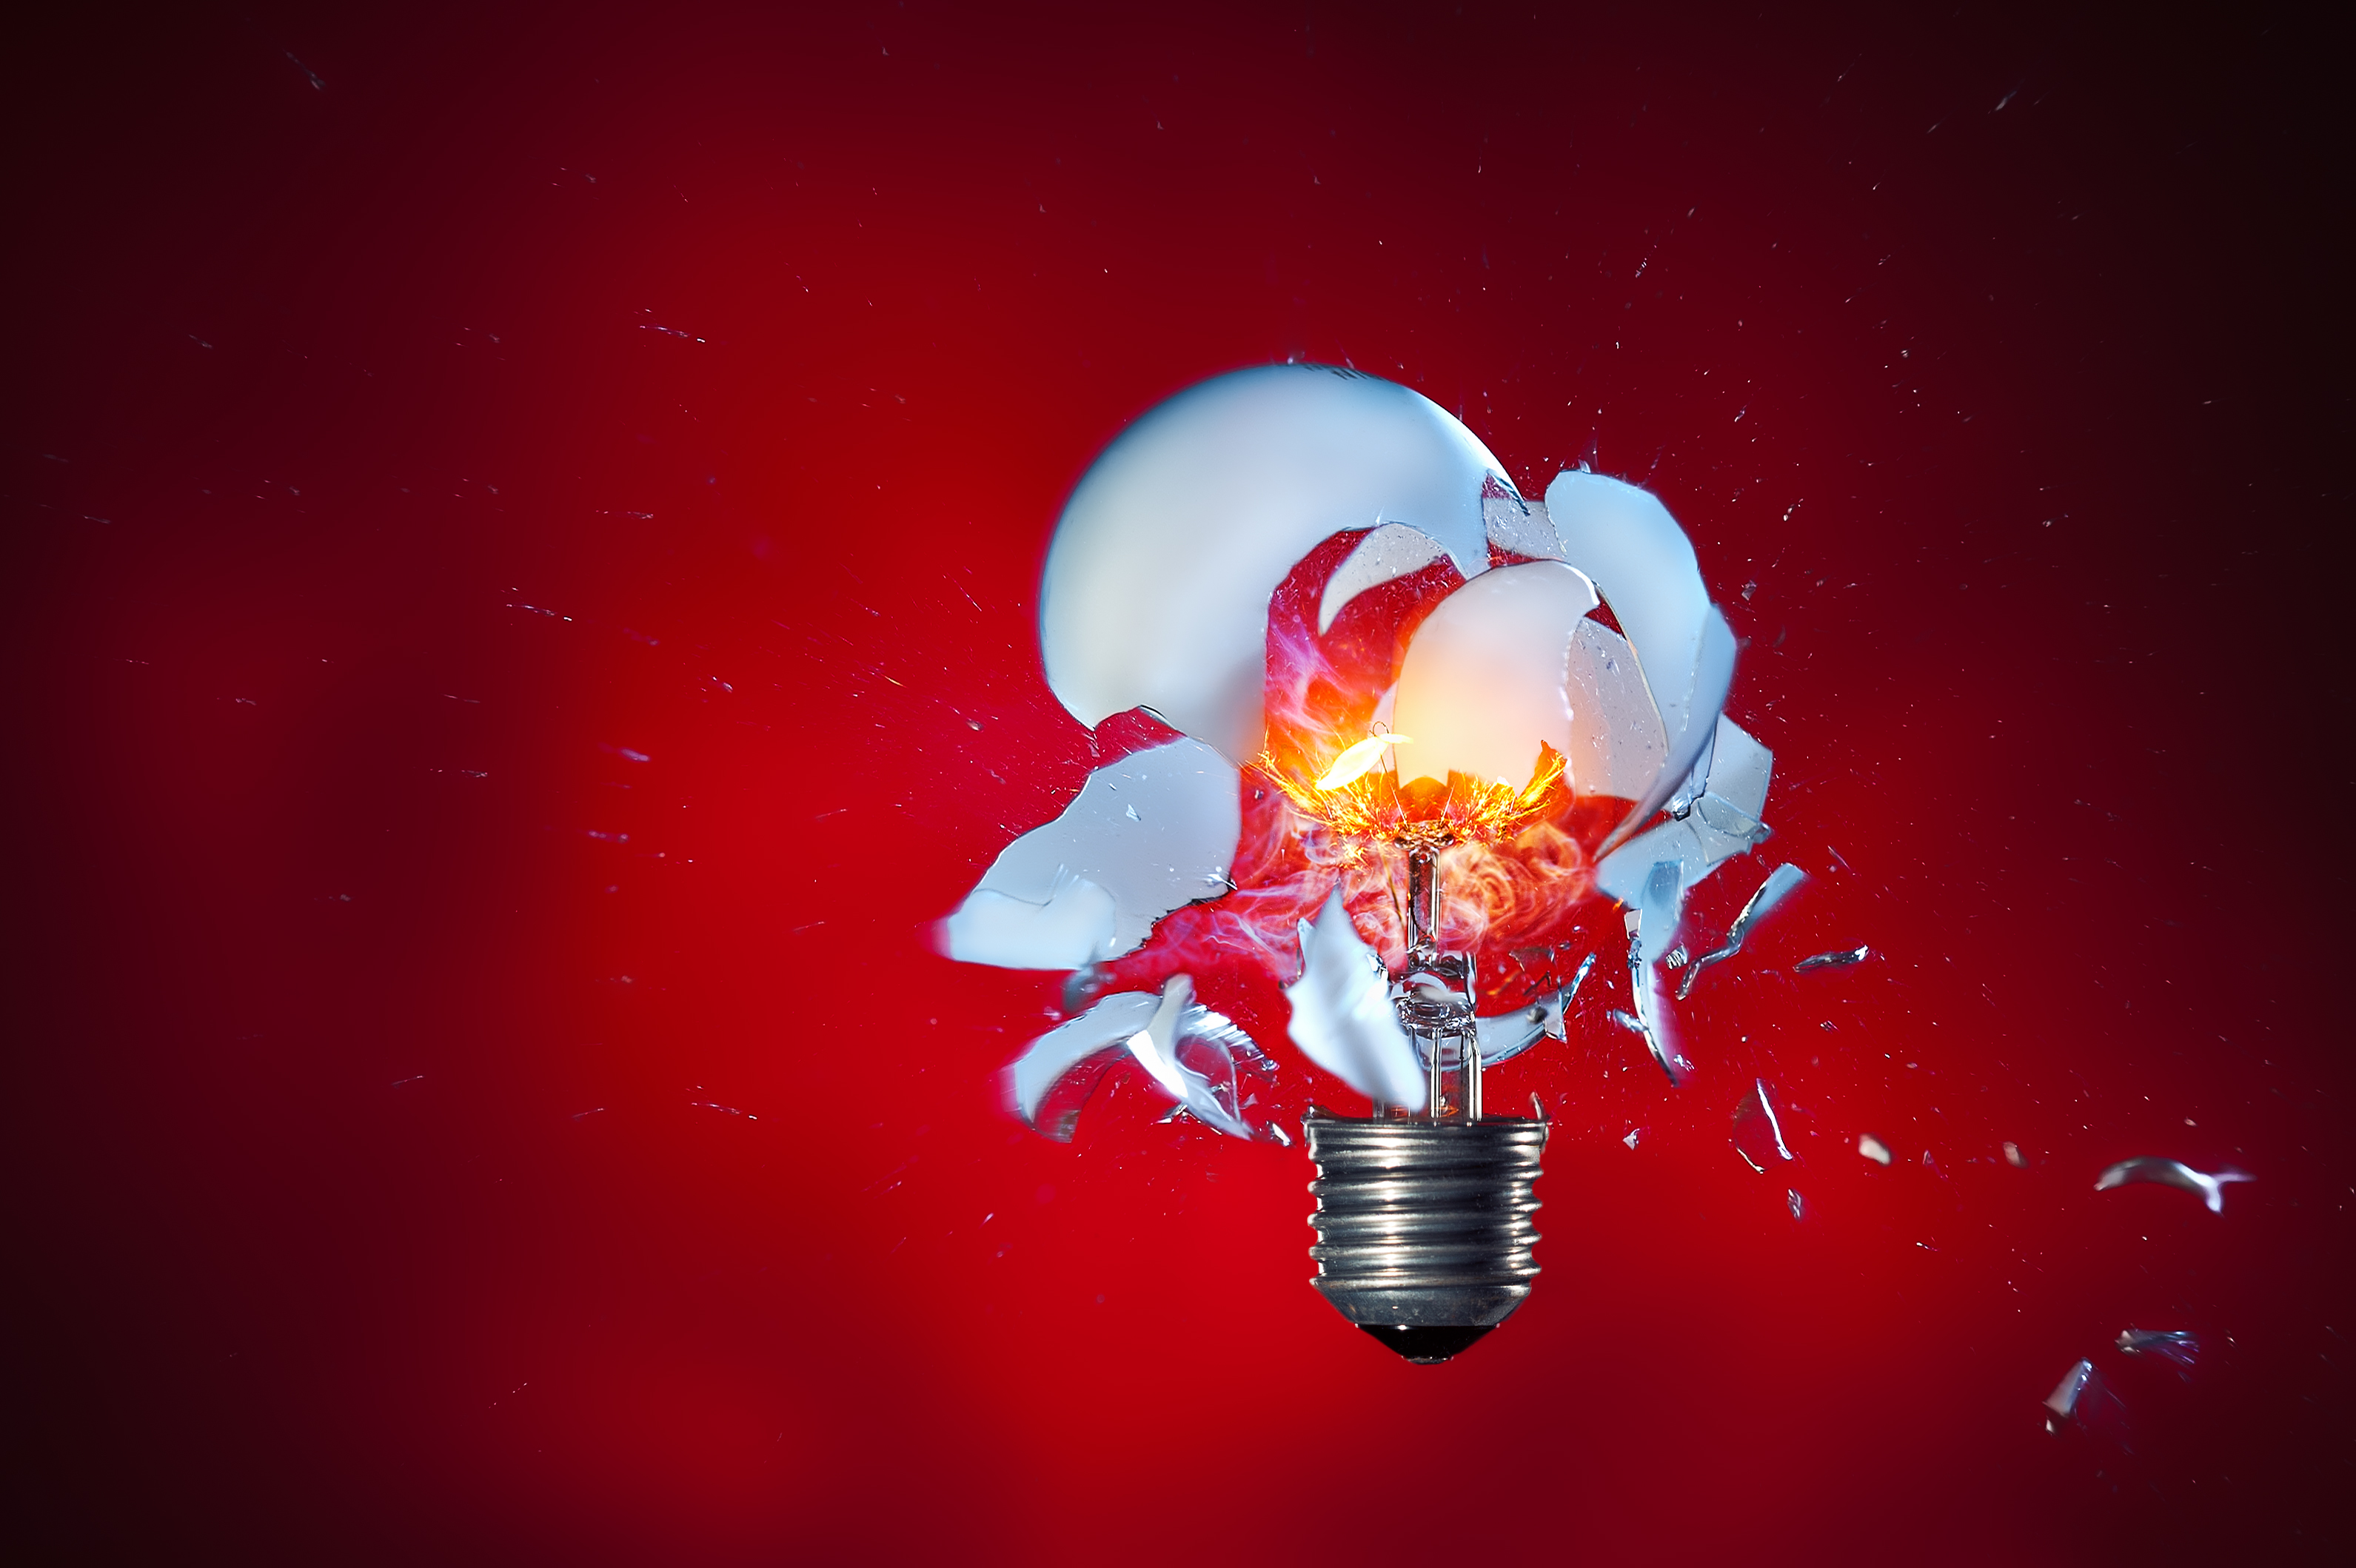 High-speed photography of an exploding light bulb by Stefan Krause